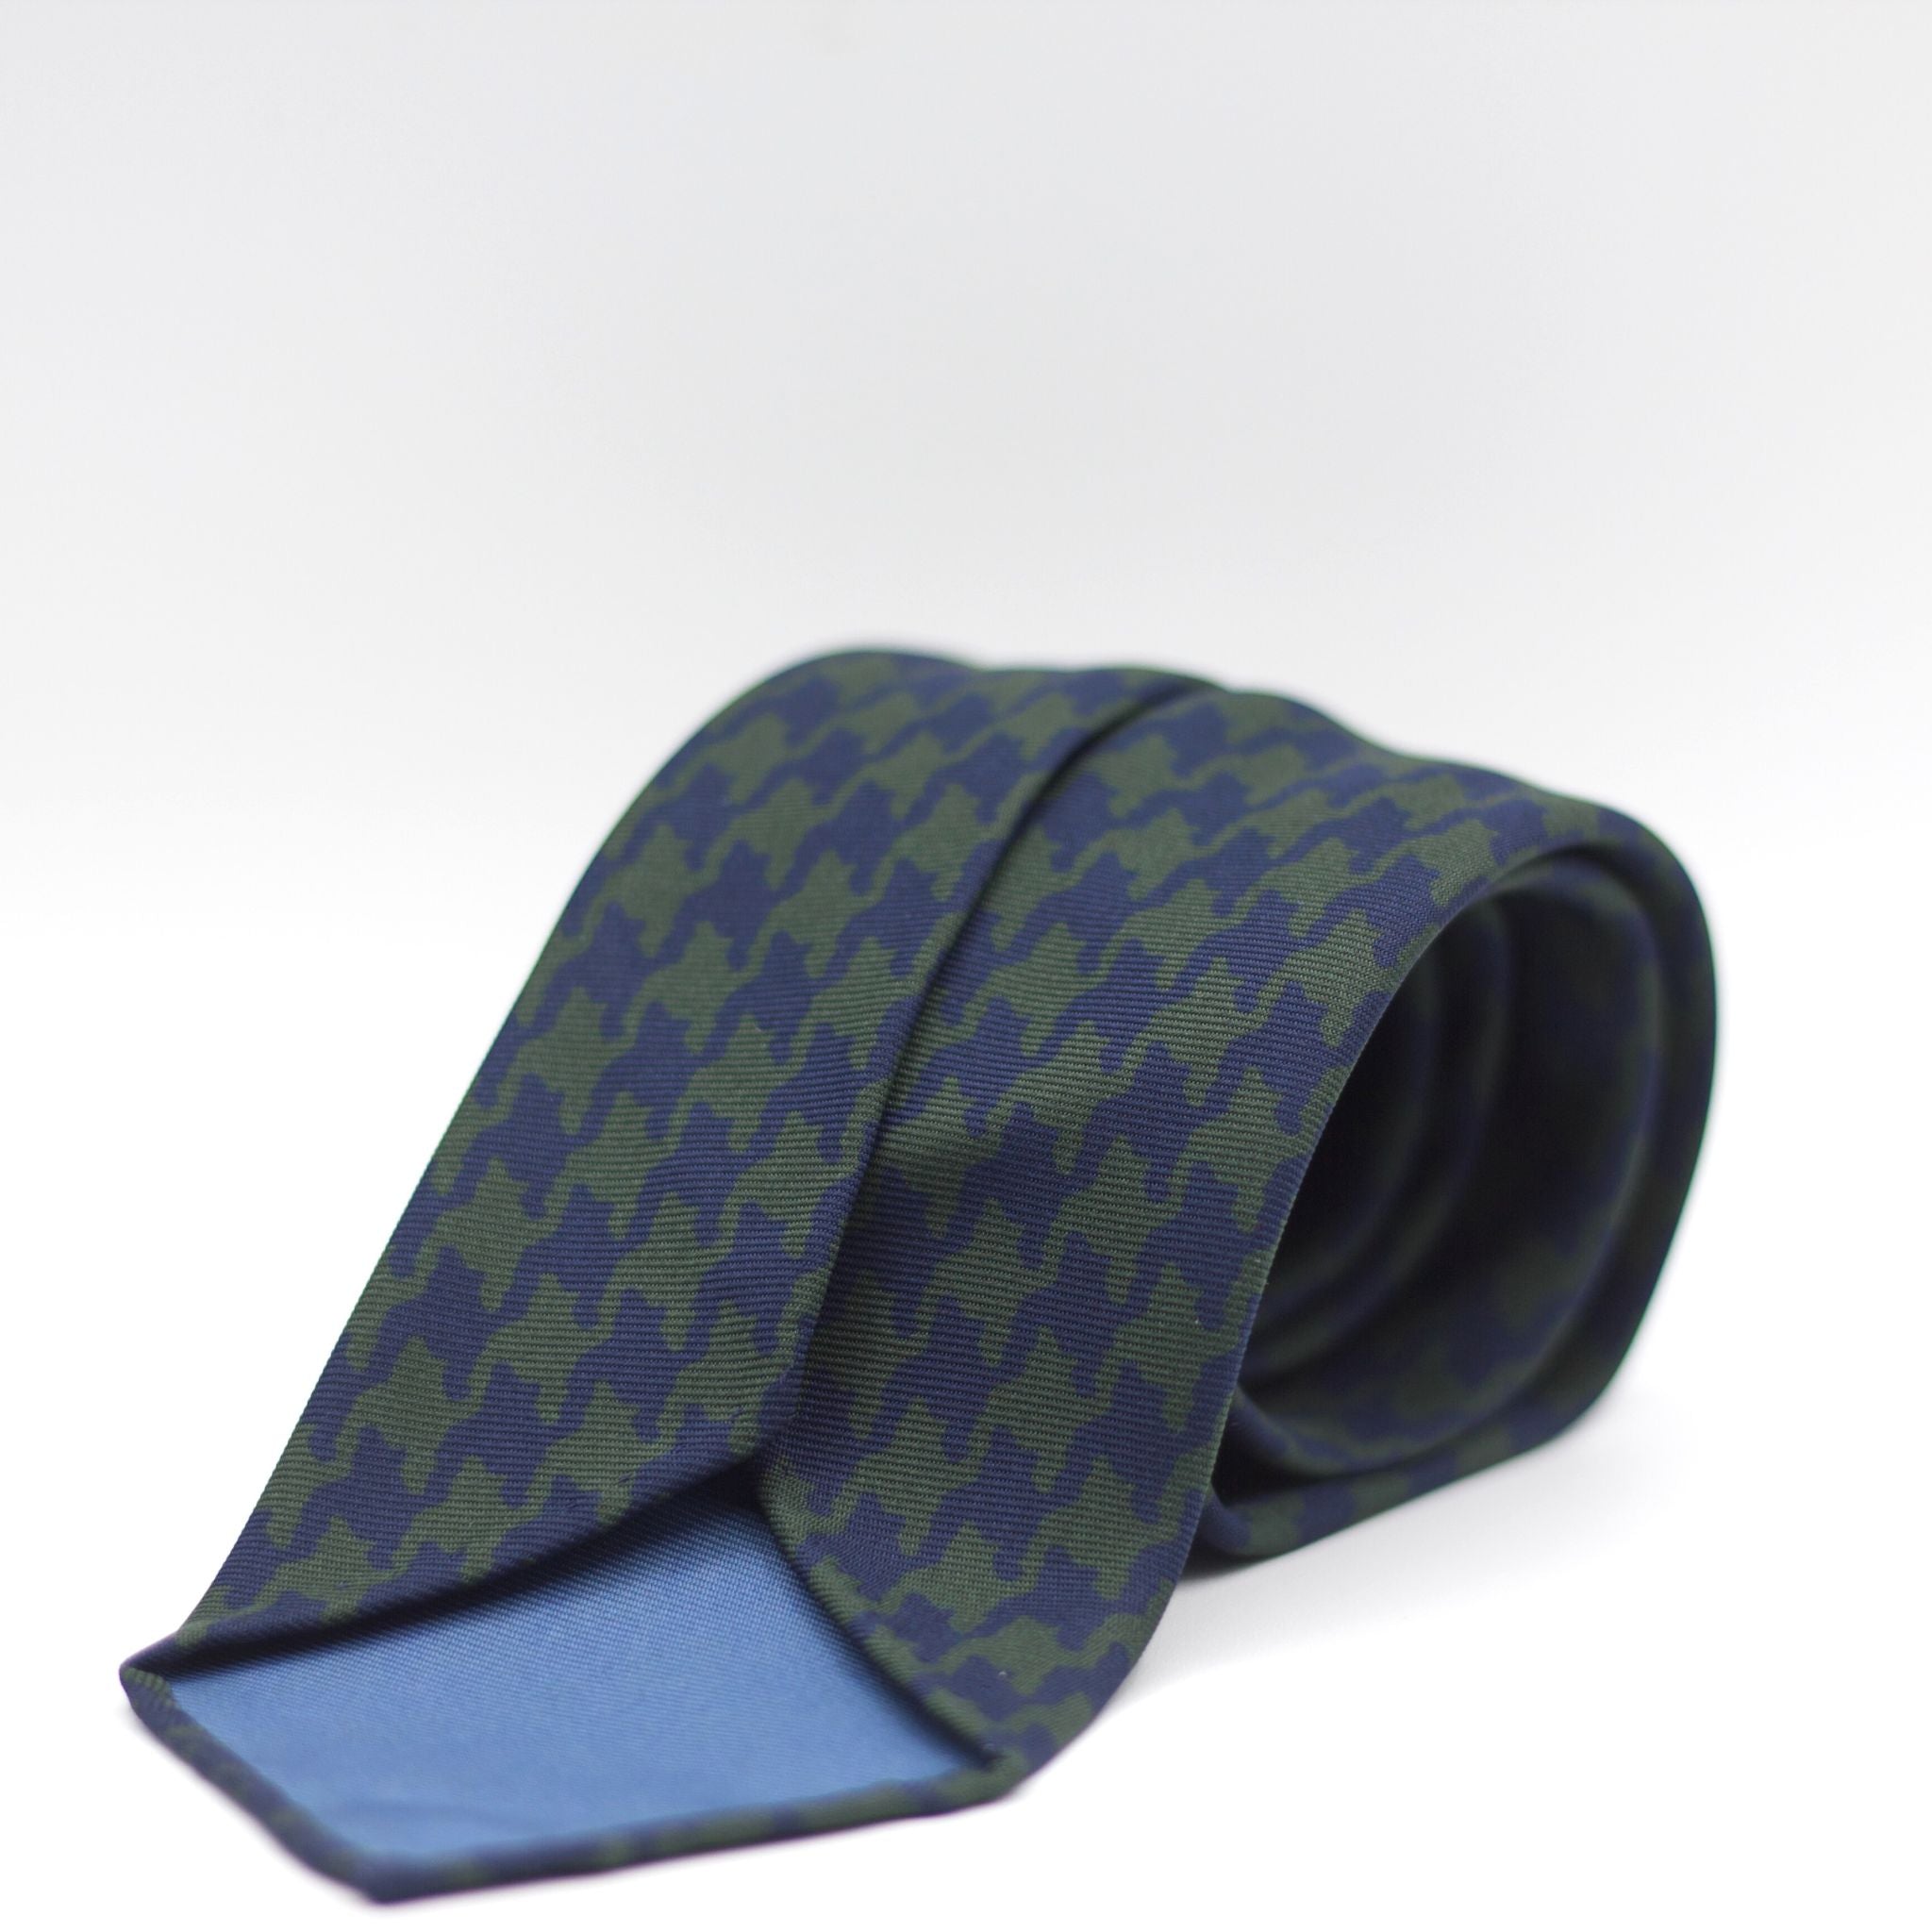 Holliday & Brown for Cruciani & Bella 100% printed Silk Unlined Seven Fold Green, Blue houndstooth motif tie Handmade in Italy 8 cm x 150 cm